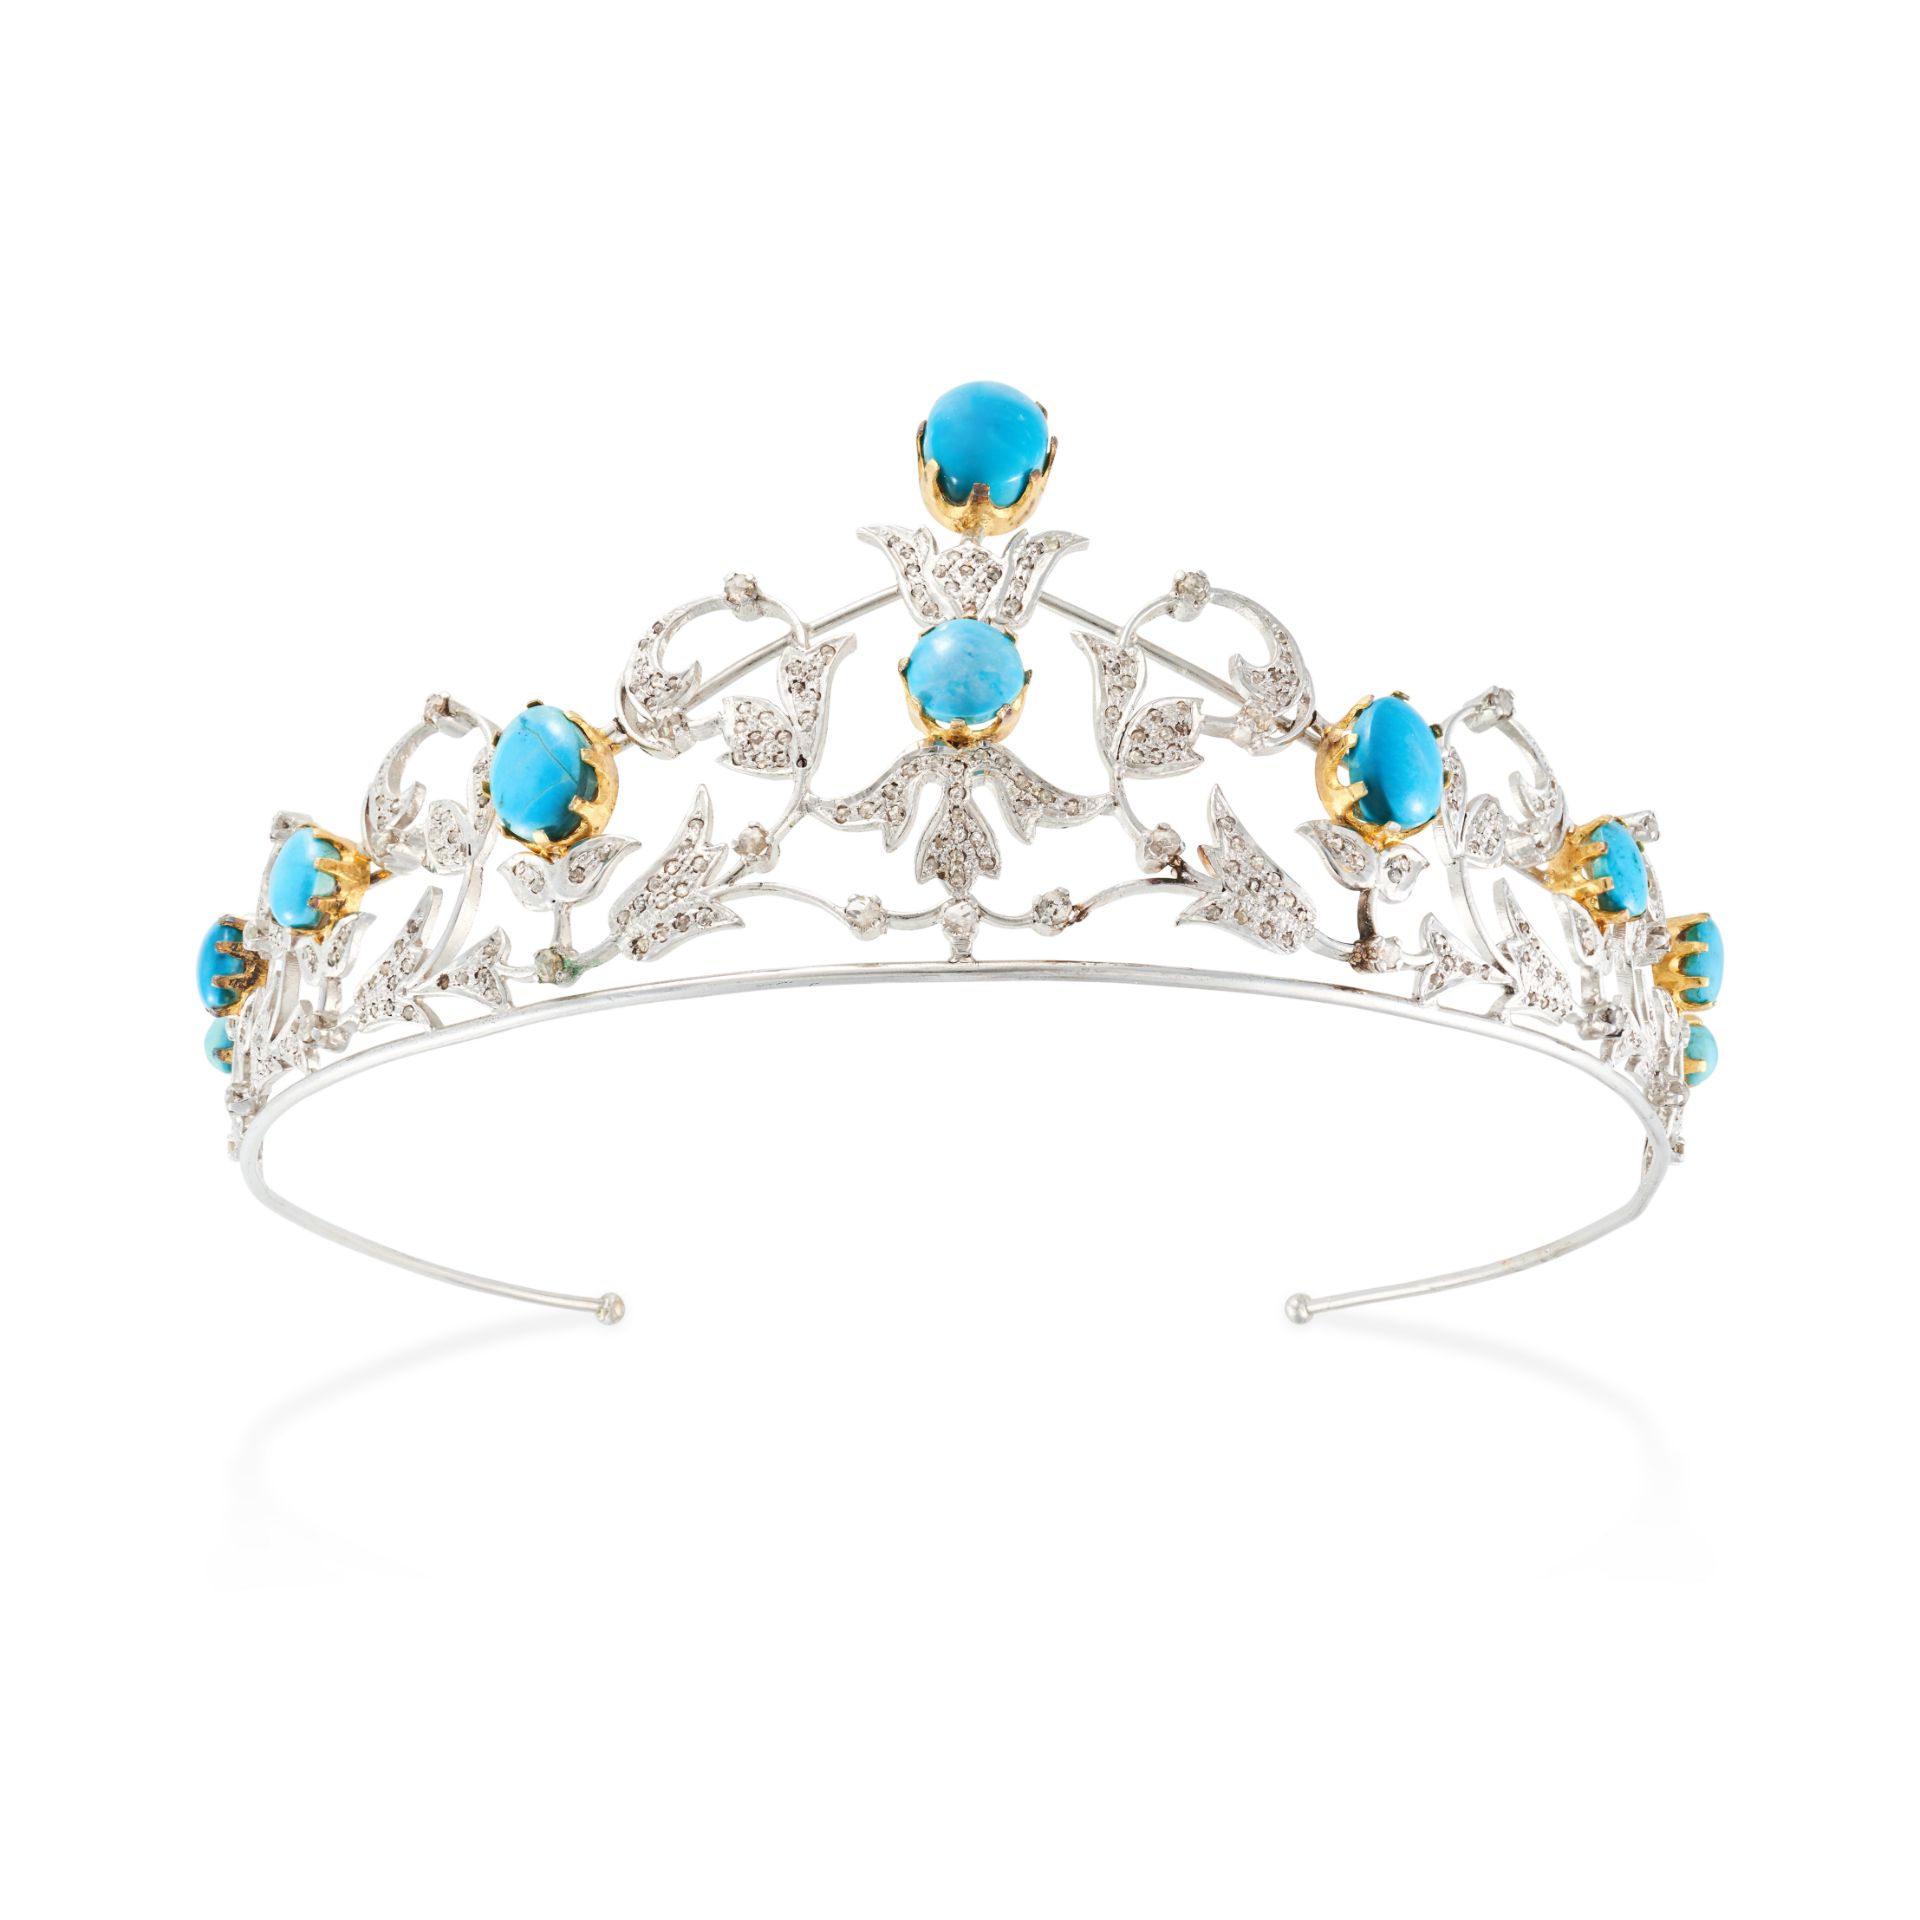 NO RESERVE - A TURQUOISE AND DIAMOND TIARA set with ten large turquoise cabochons within a scroll...